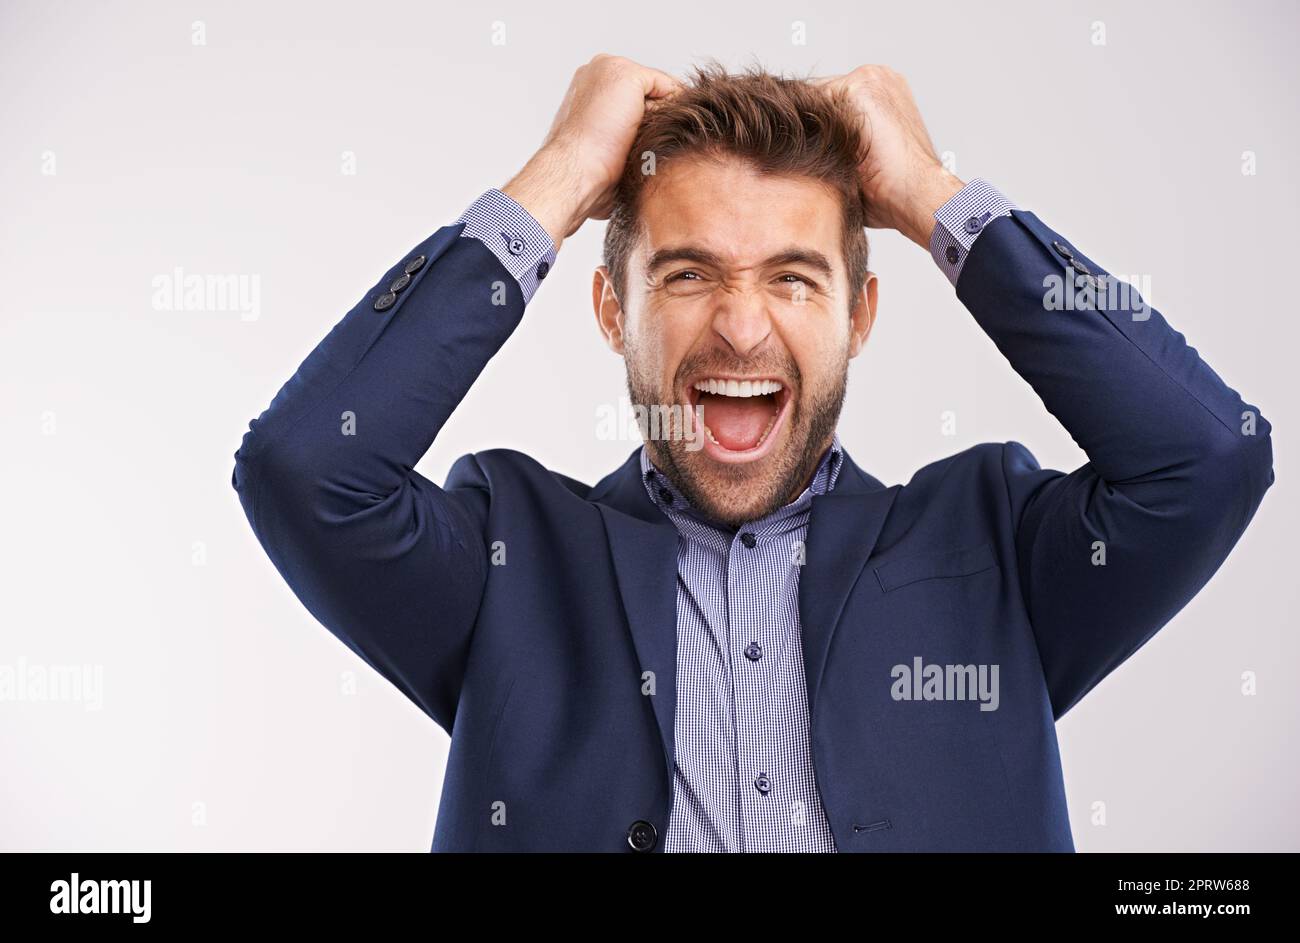 Youve got to be kidding me. Portrait of a excited young businessman celebrating success isolated against white background. Stock Photo